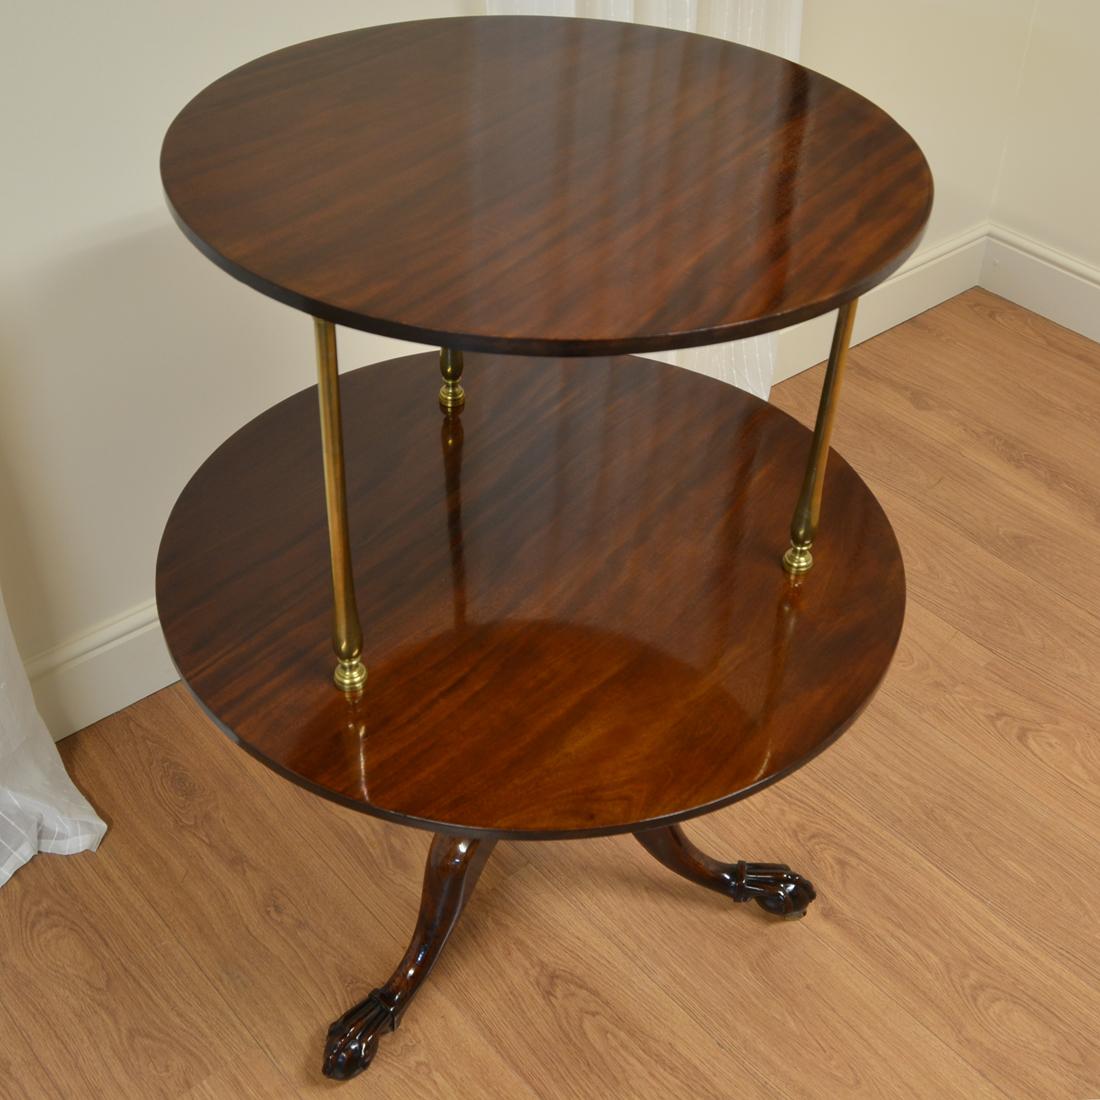 18th Century Georgian Mahogany Antique Two Tier Circular Occasional Lamp Table In Good Condition For Sale In Link 59 Business Park, Clitheroe